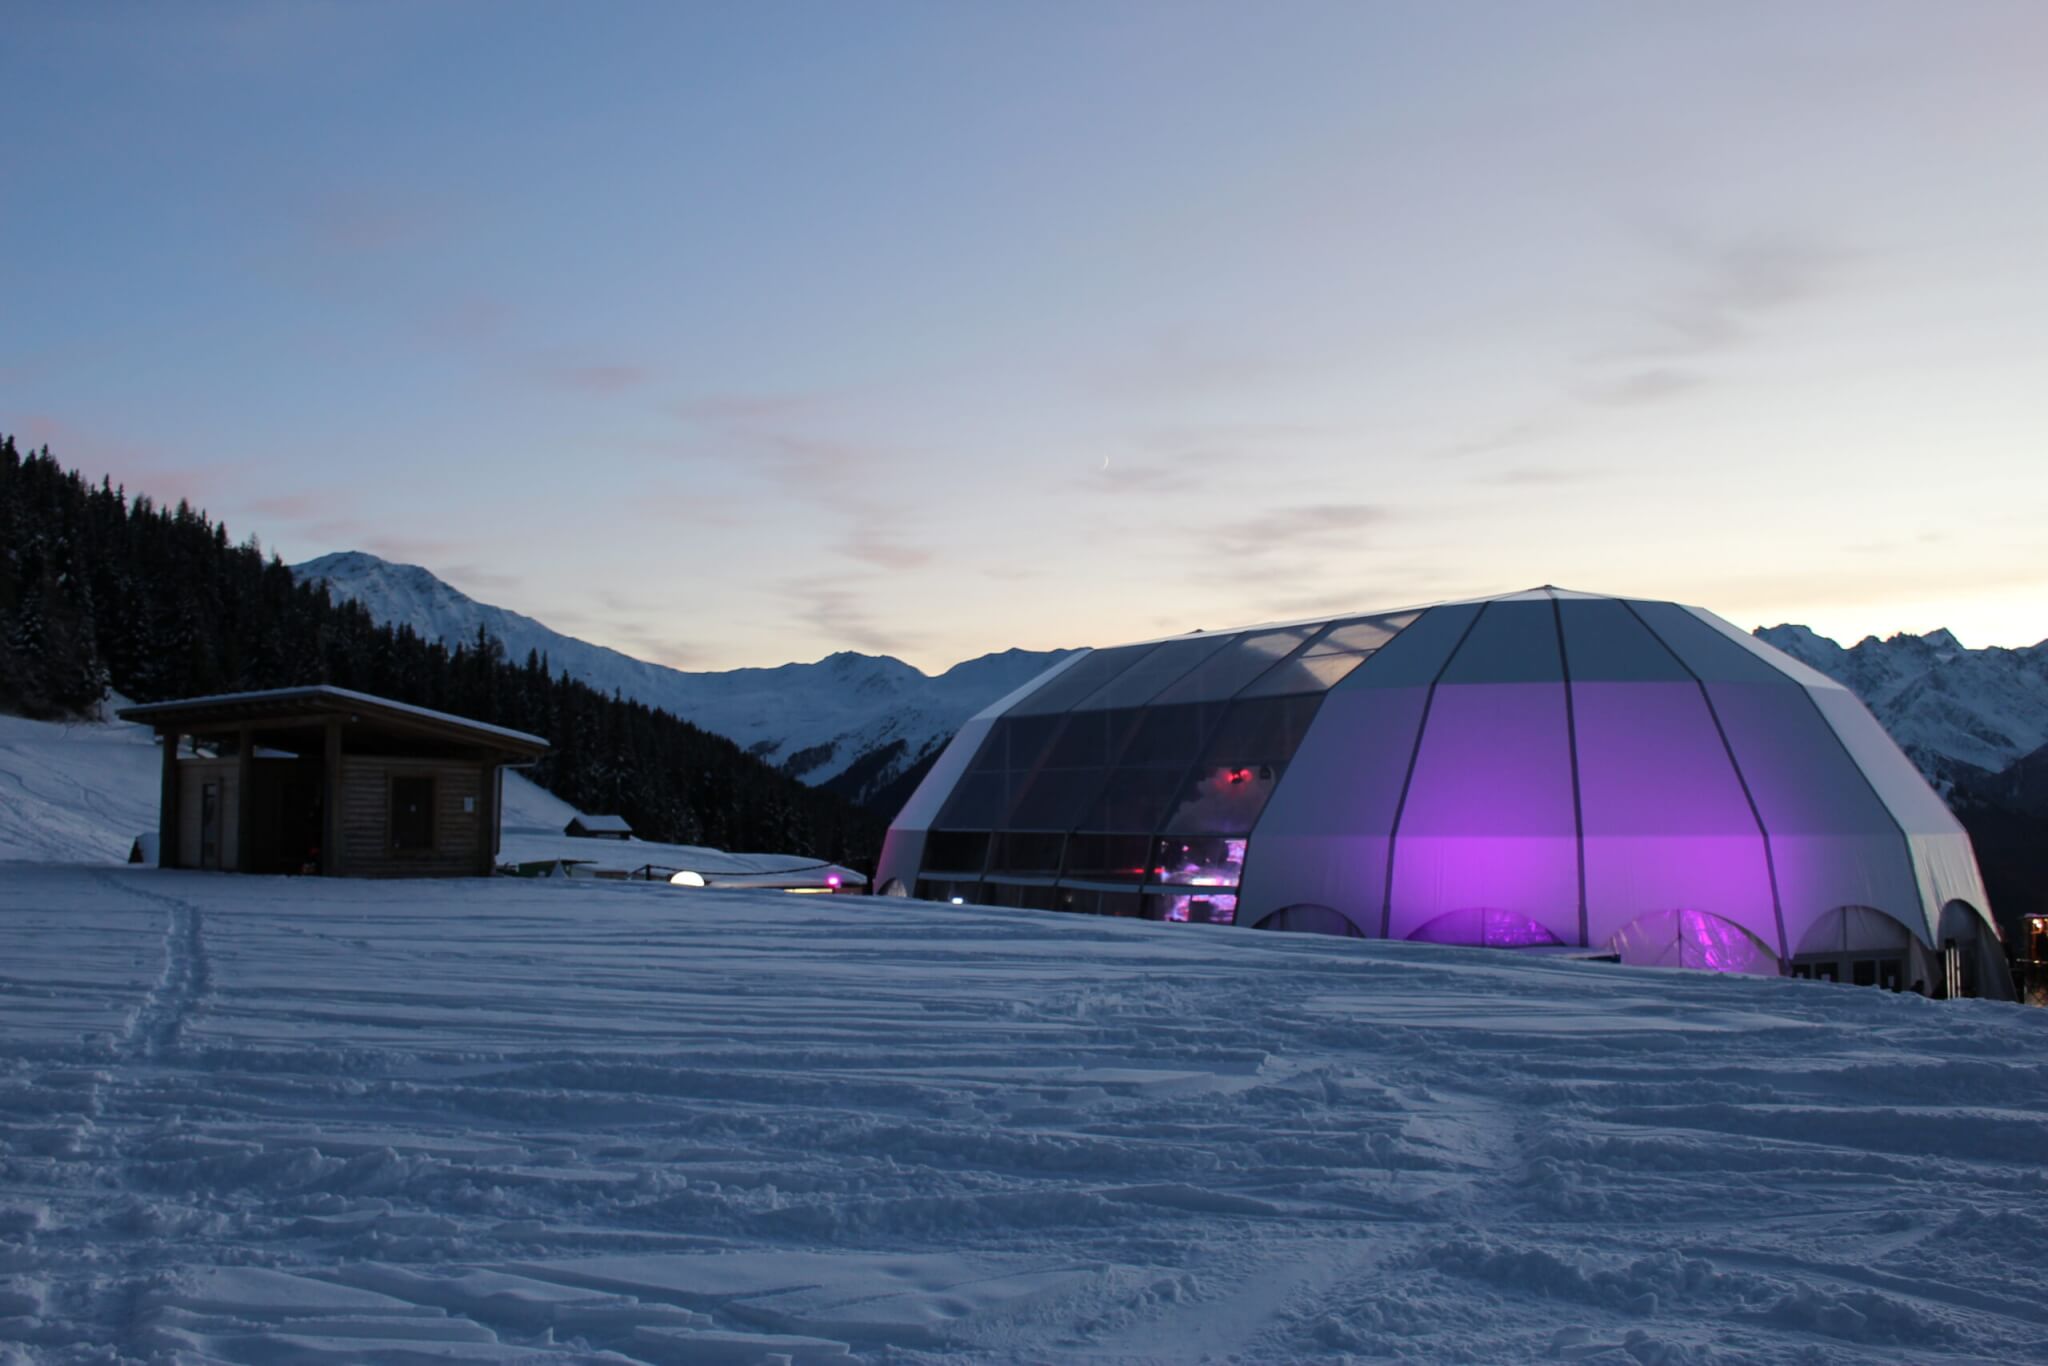 POLARIS FESTIVAL TENT - VERBIER, SWITZERLAND. Built up mountain environment in winter with dome at twilight